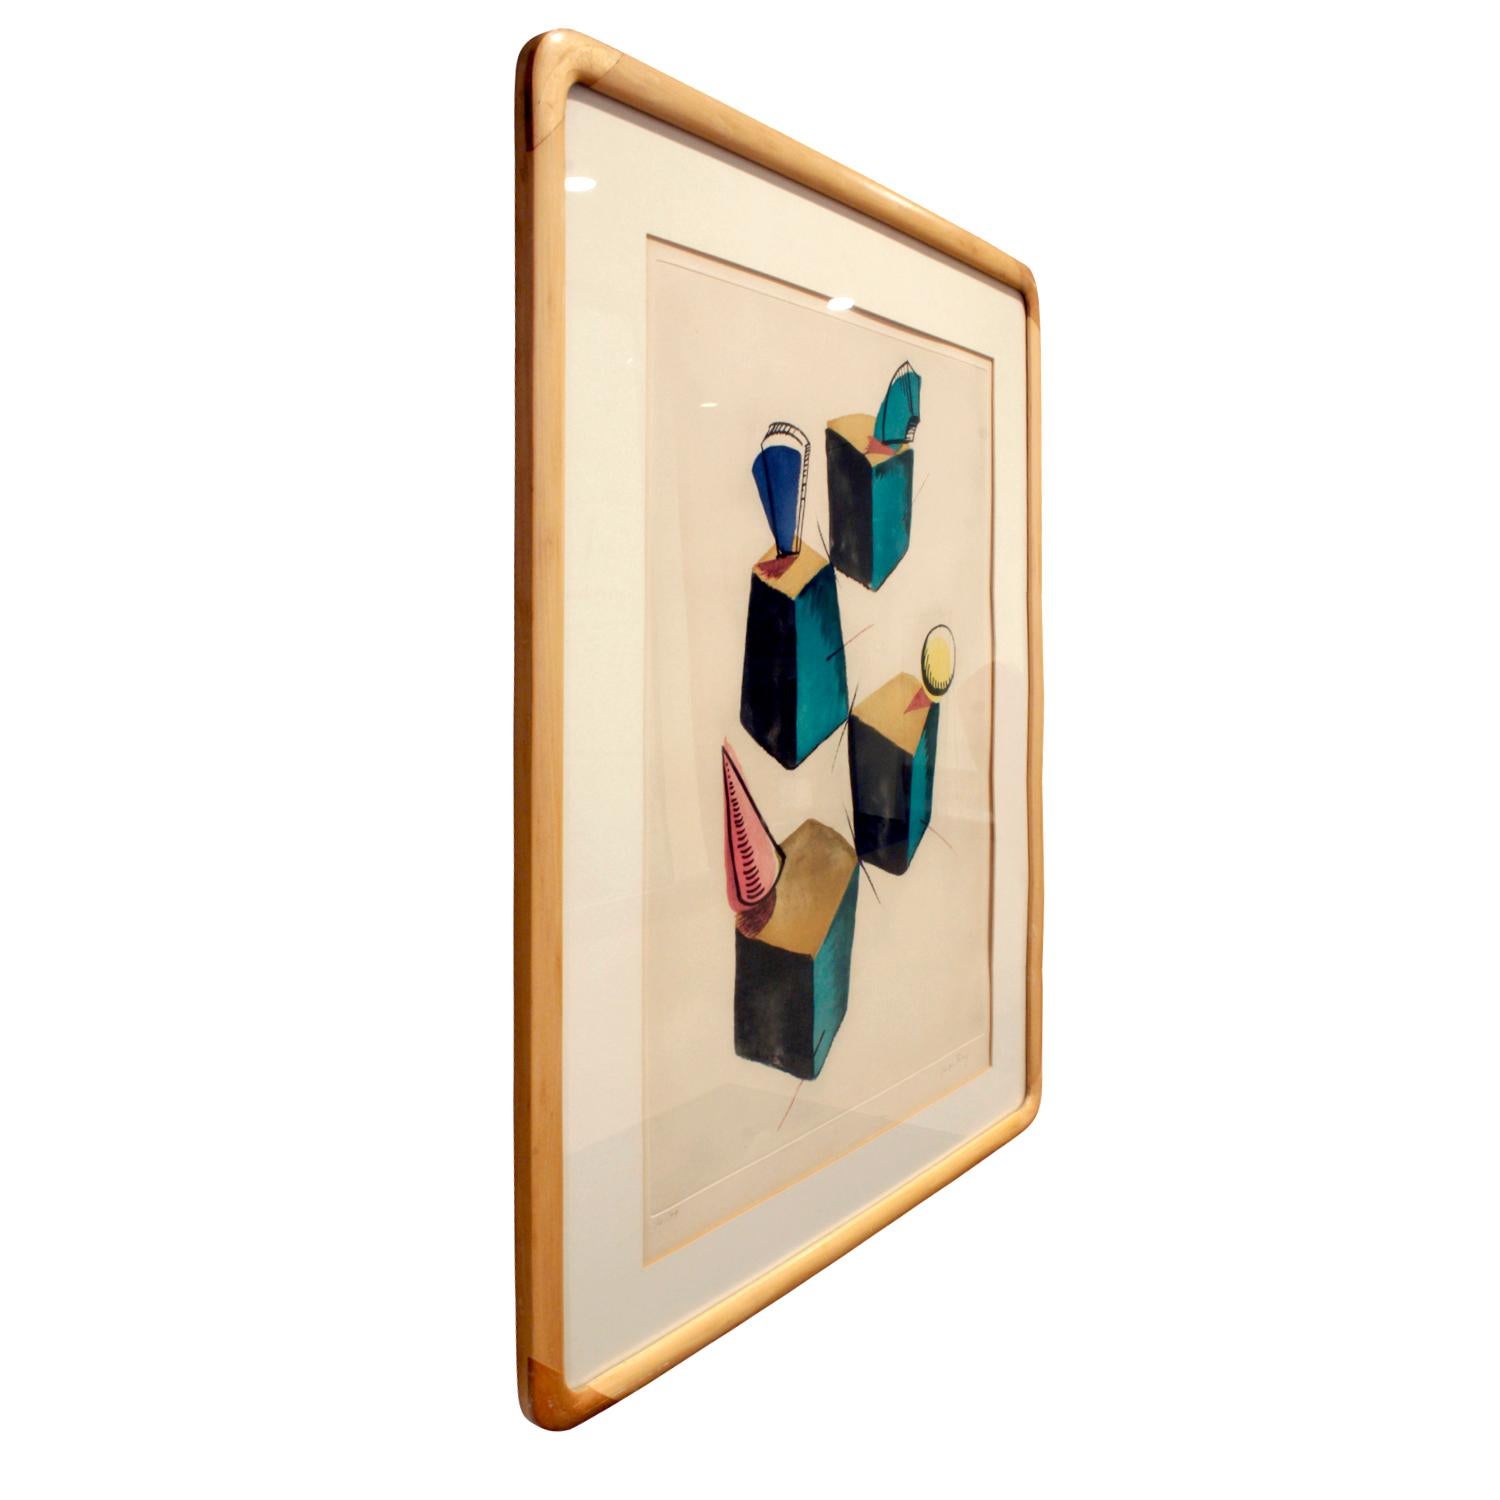 Color lithograph with geometric motif by Man Ray, 1960s (signed and numbered 70/99 on front). In original artisan frame.